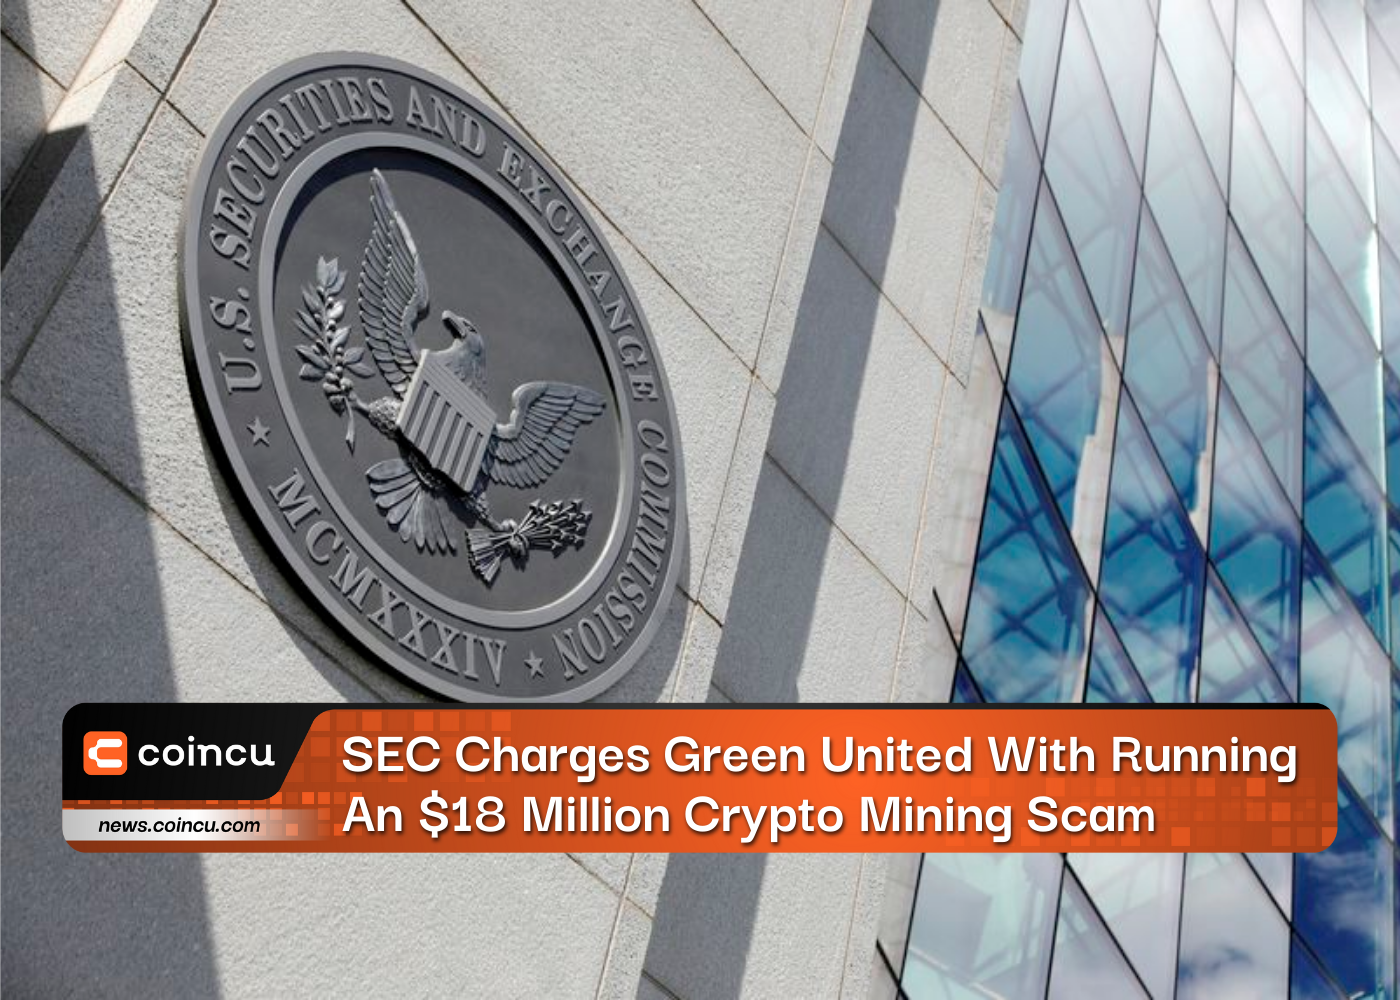 SEC Charges Green United With Running An $18 Million Crypto Mining Scam